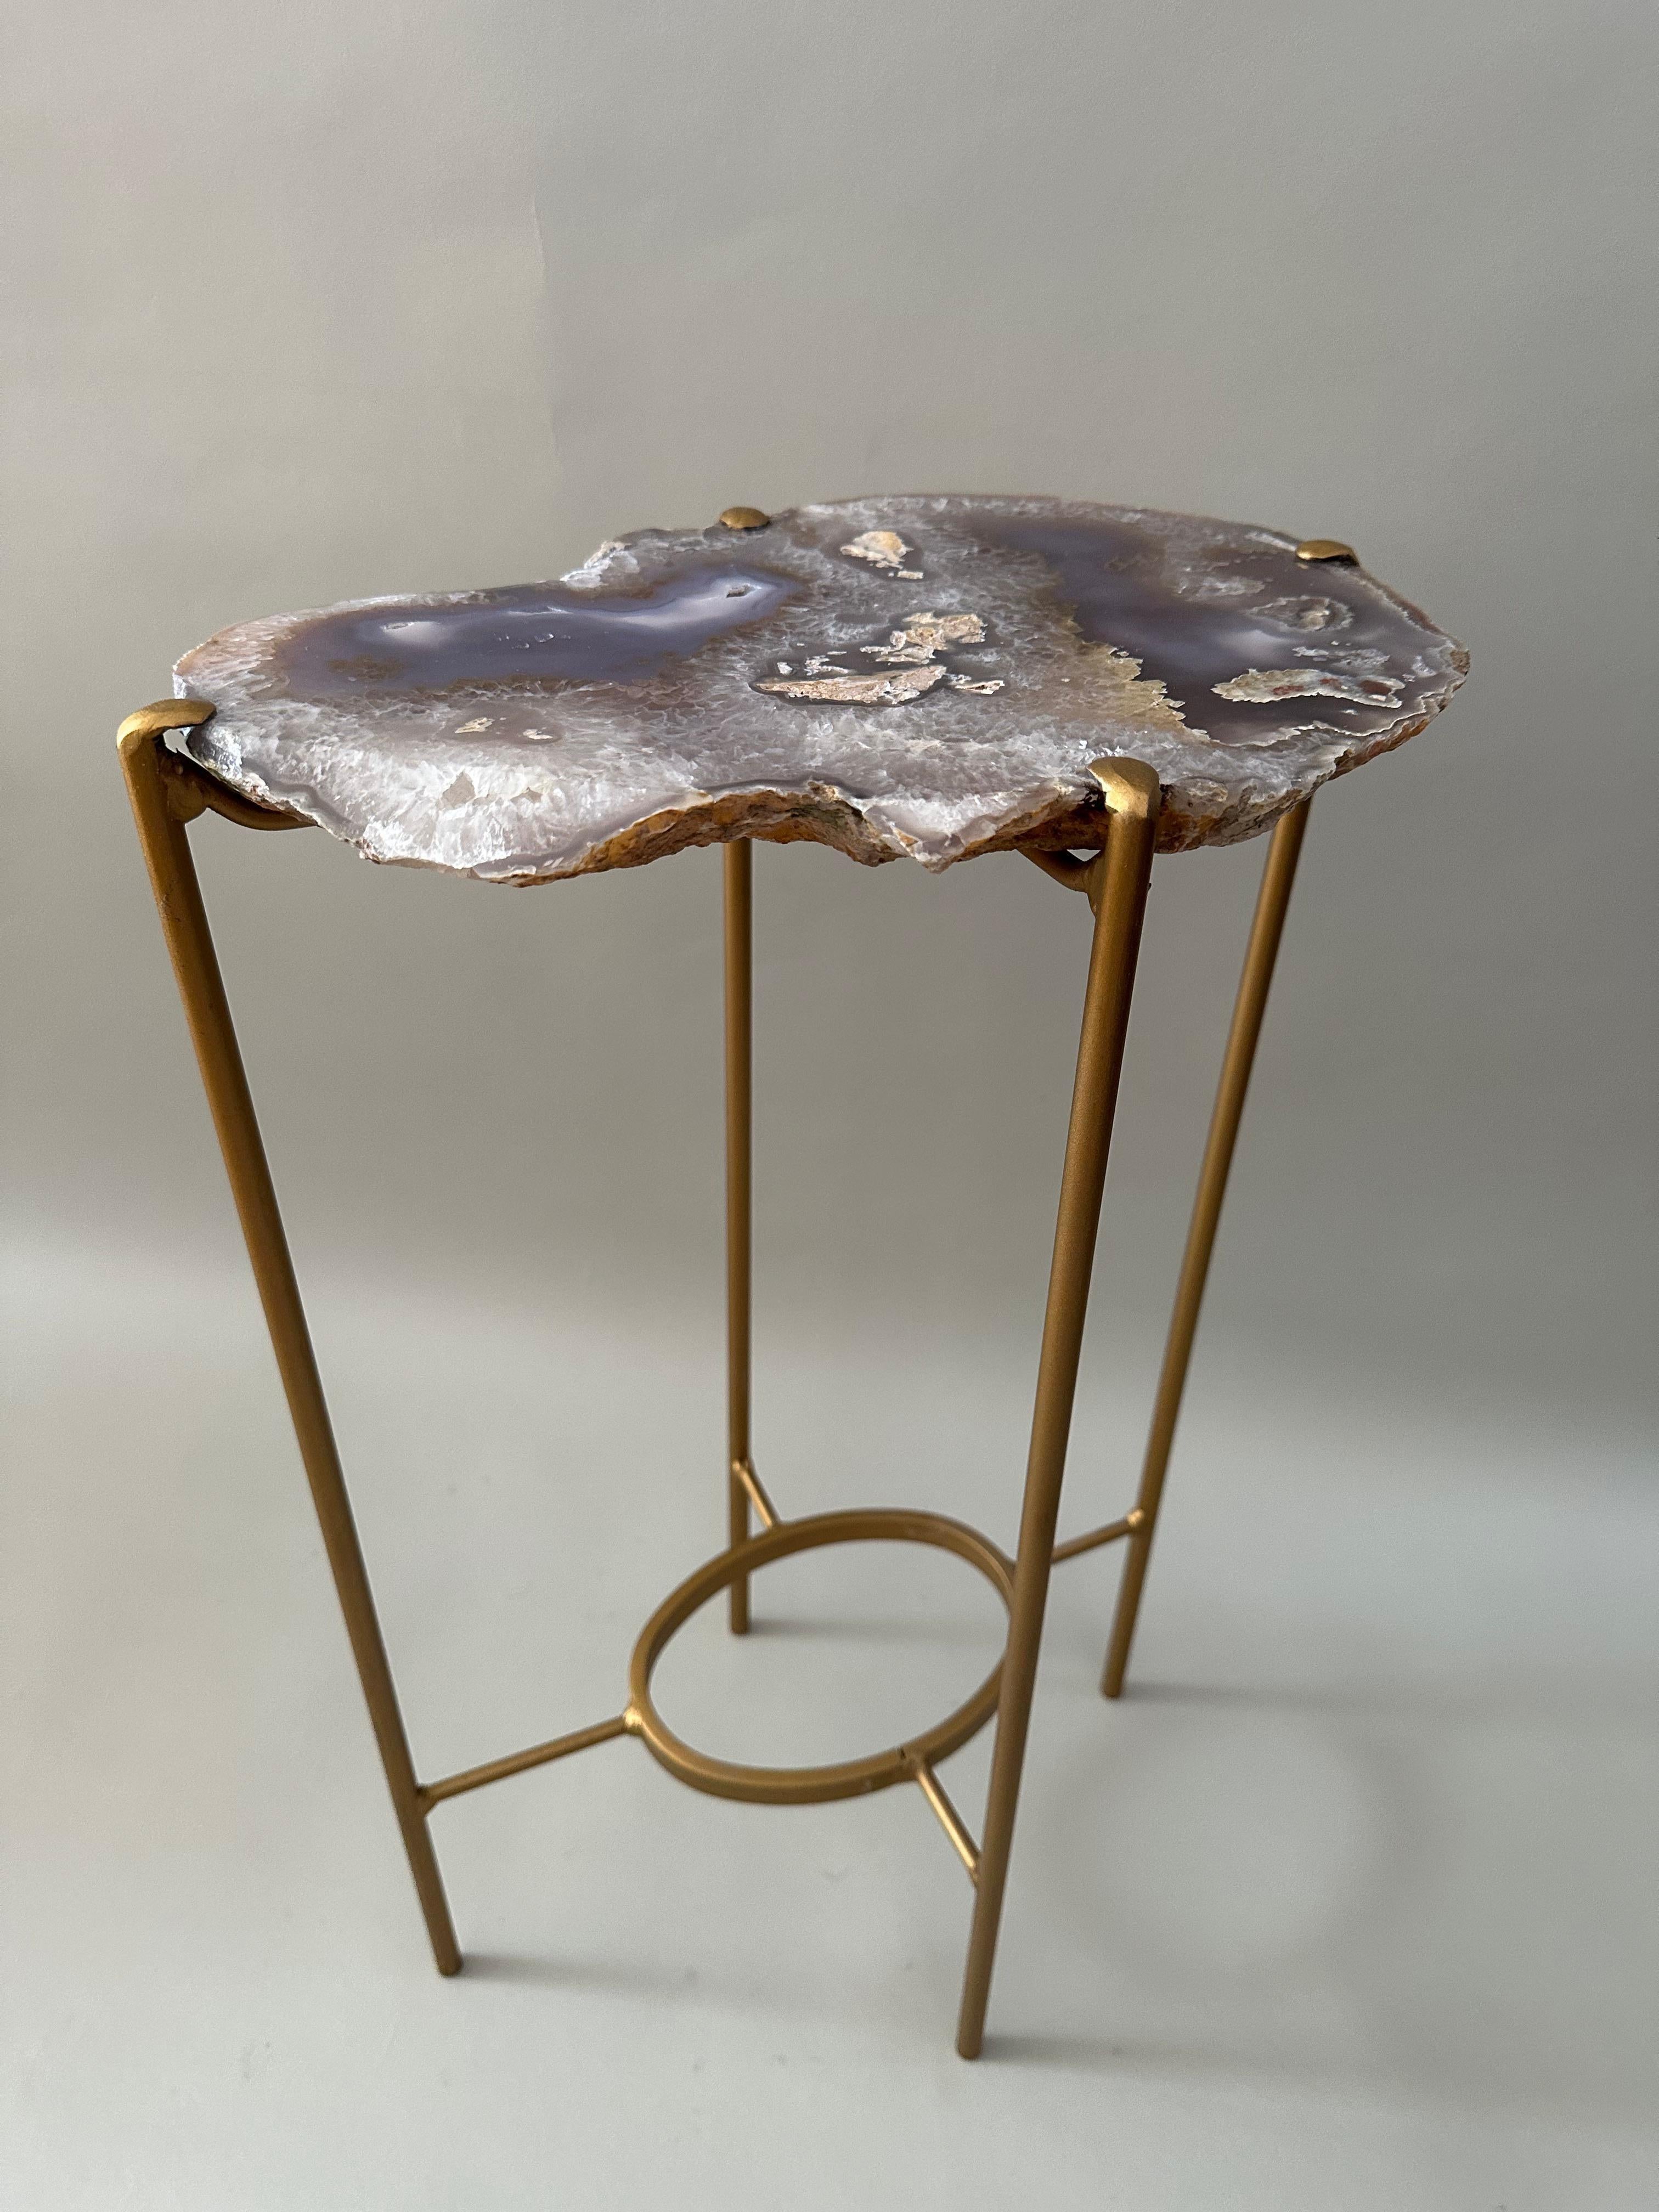 Unusual Modern Handcrafted Geode Drinks Table. Quartzite top with gilt steel base. Grays Creams and Purples with dramatic contrasts